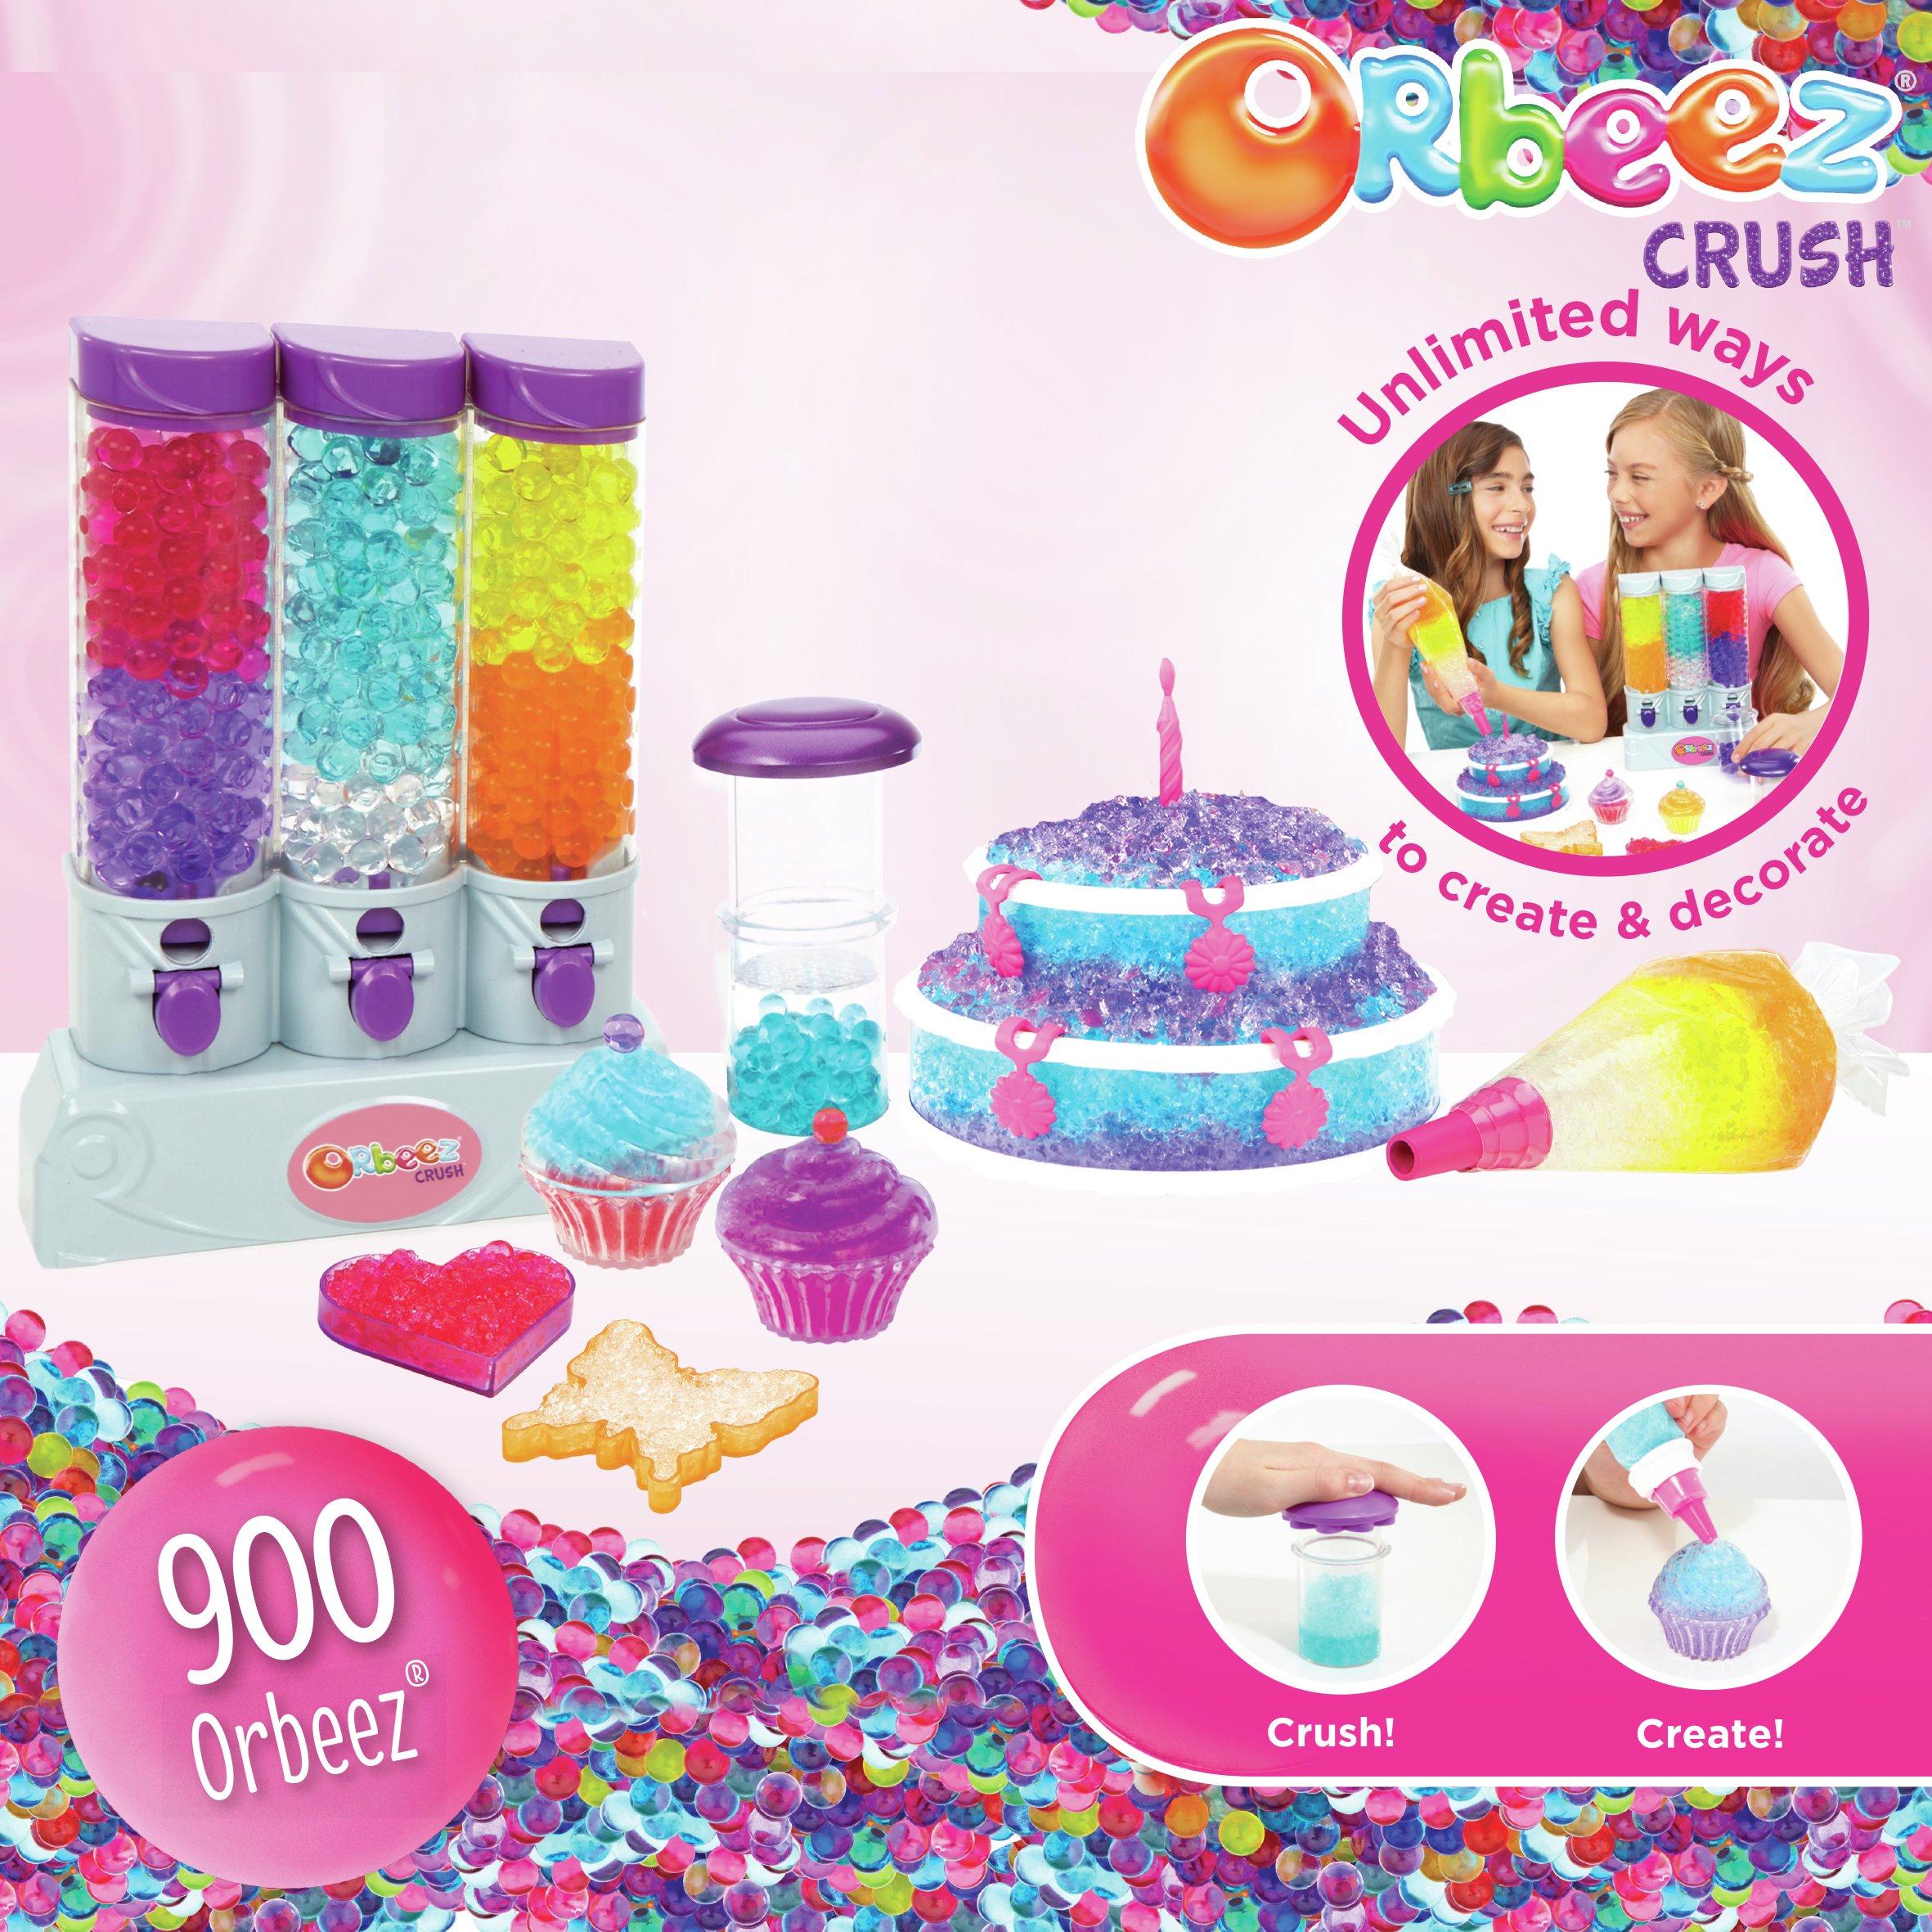 Orbeez Crush and Create Studio Kit Reviews - 6996929 R Z001A